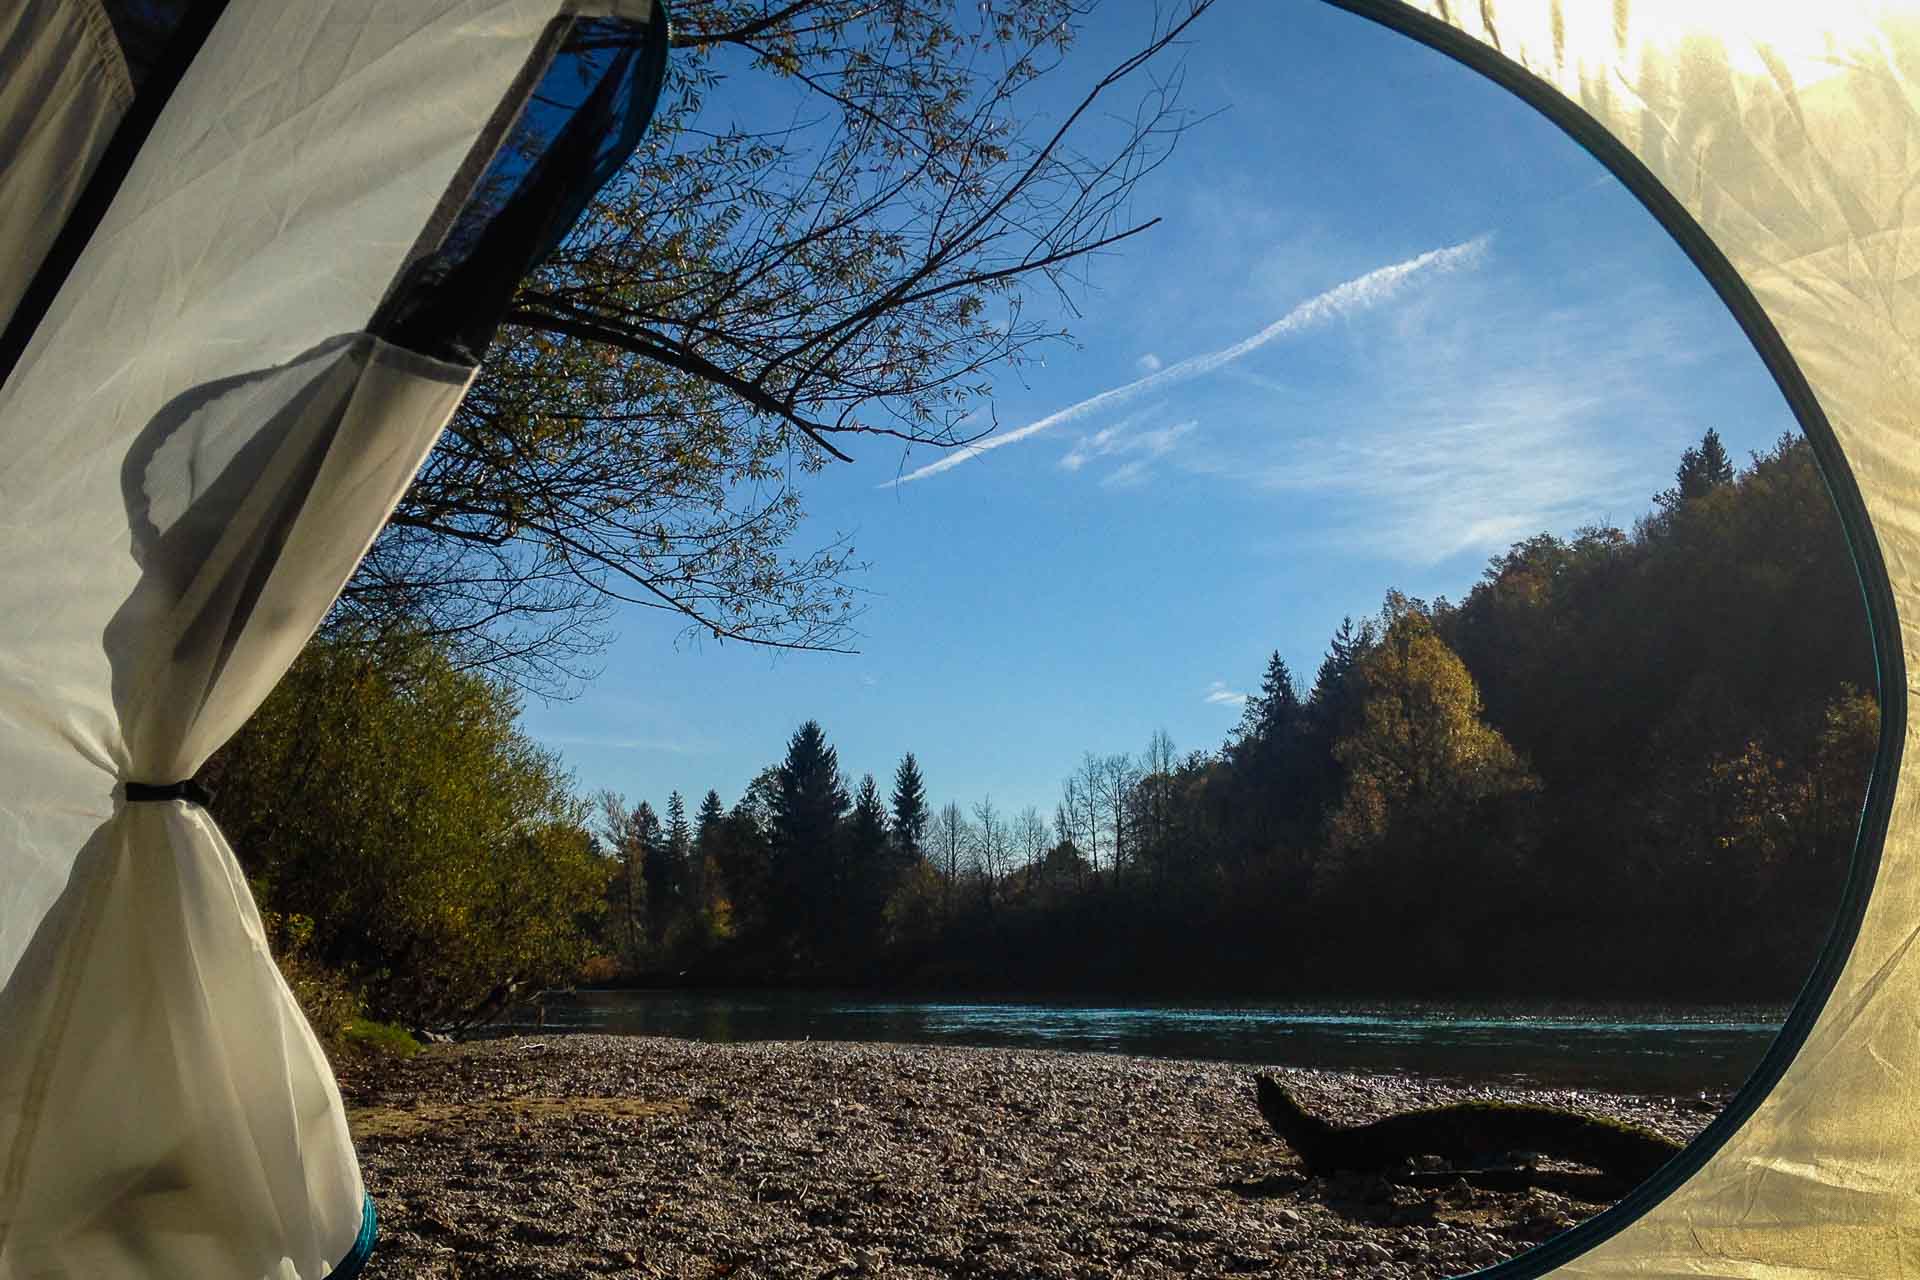 The view from inside the camping tent looking to the river in Slovenia